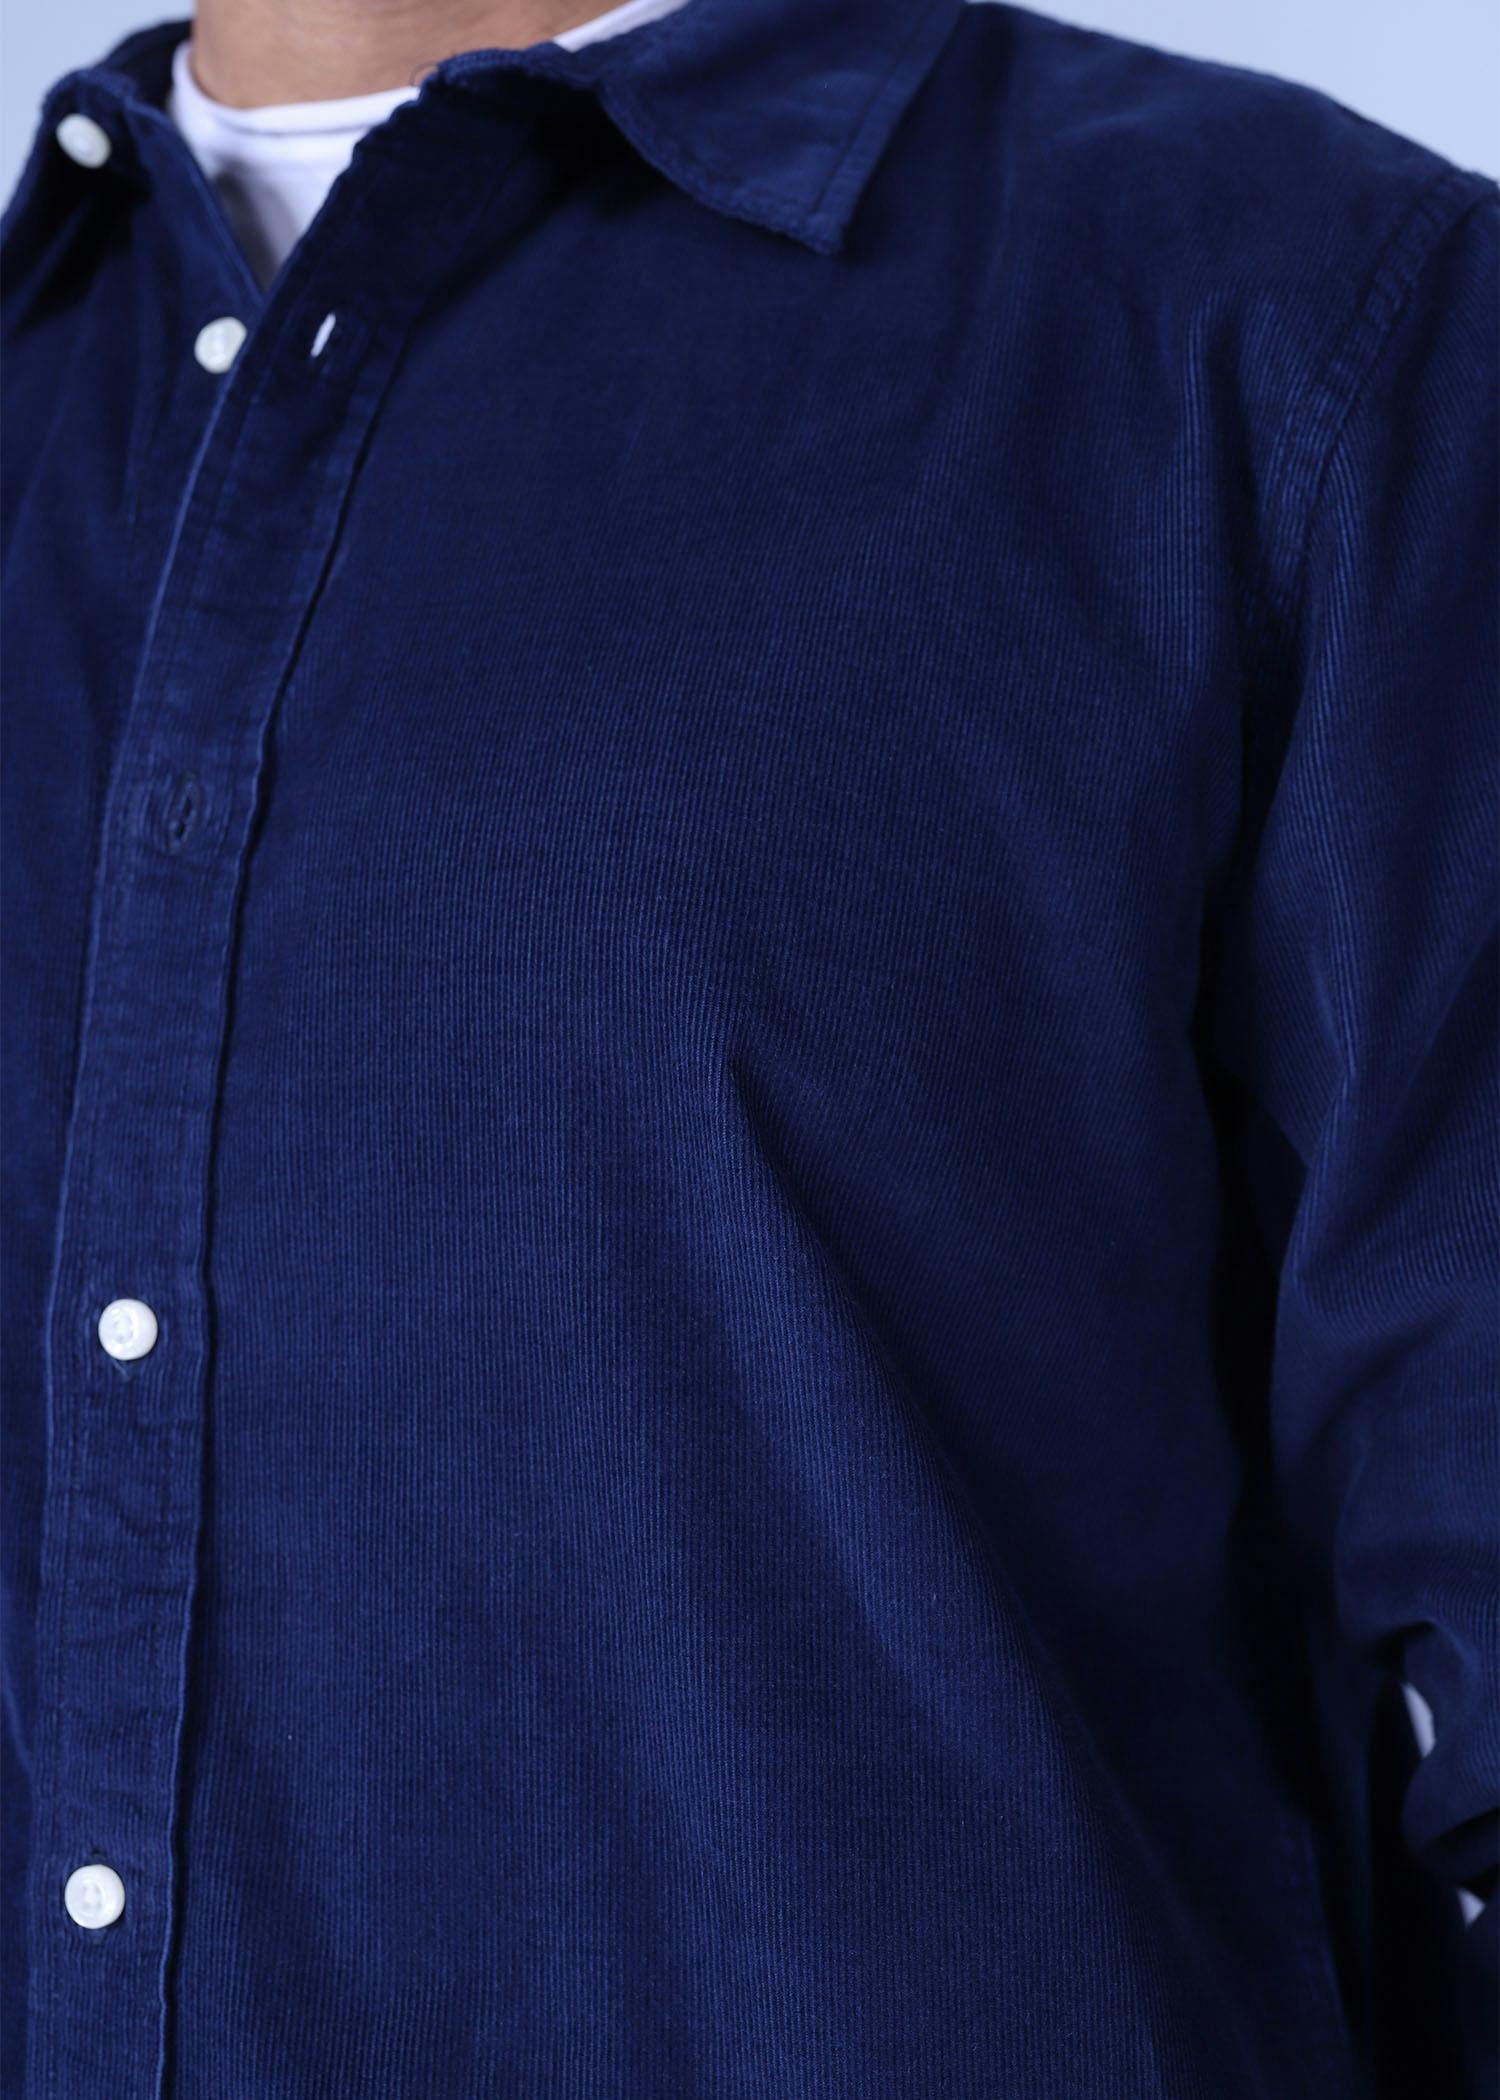 beijing i corduroy shirt navy color close front view